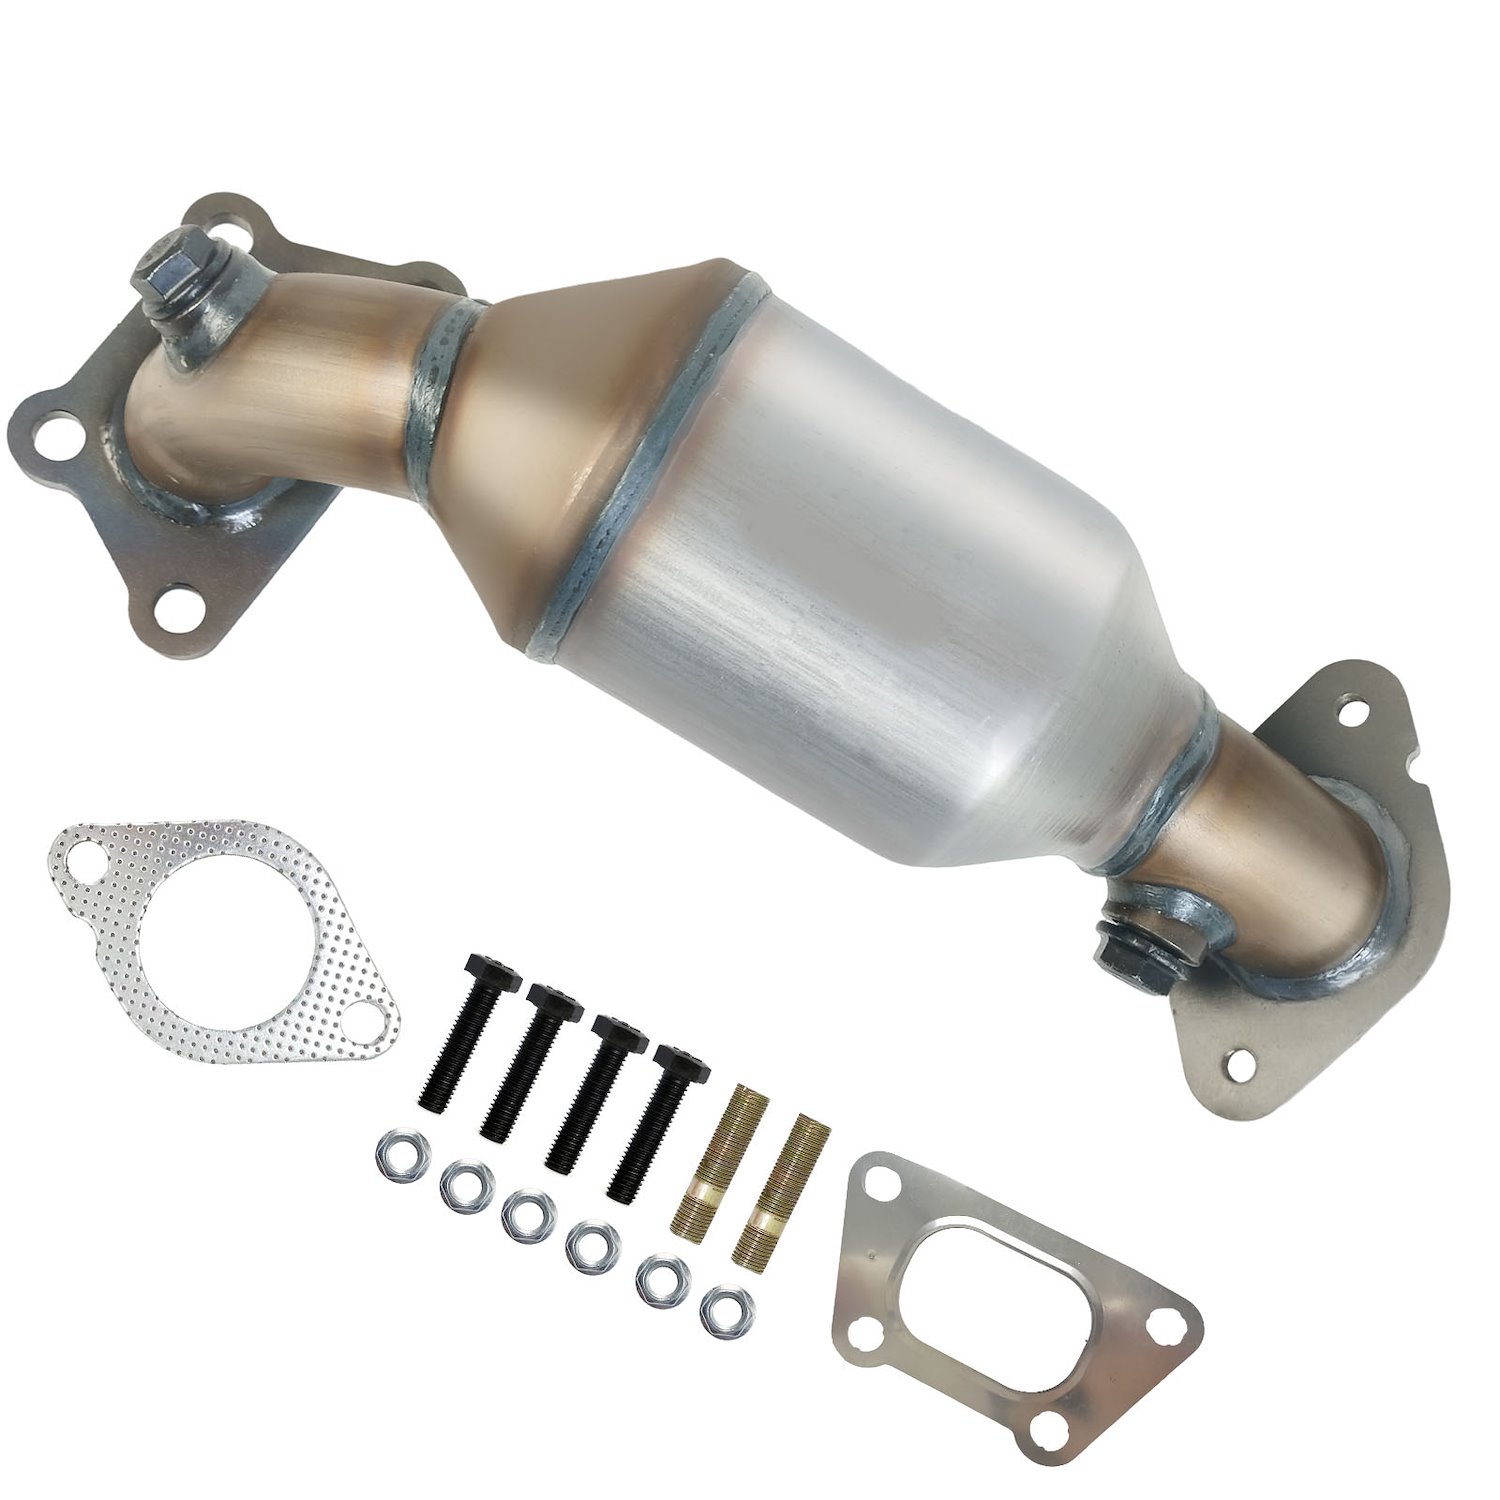 Catalytic Converter Fits 2012-2016 Buick LaCrosse, 2013-2016 Cadillac XTS, 2014-2018 Chevy Impala w/3.6L V6 [Front Left]